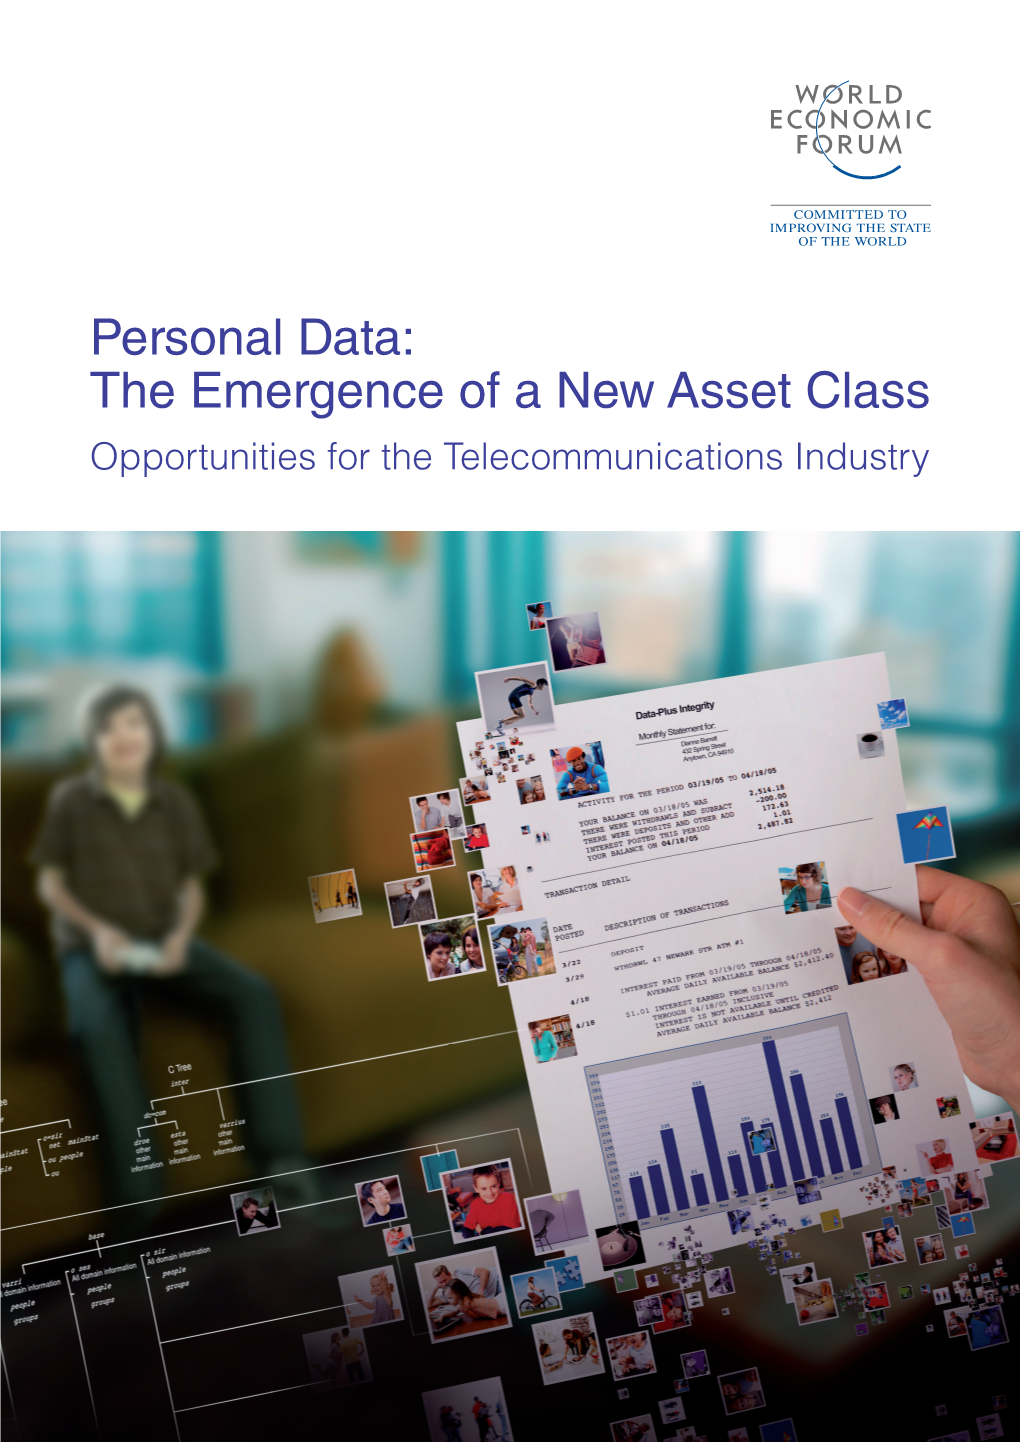 Personal Data: the Emergence of a New Asset Class Opportunities for the Telecommunications Industry an Initiative of the World Economic Forum February 2011